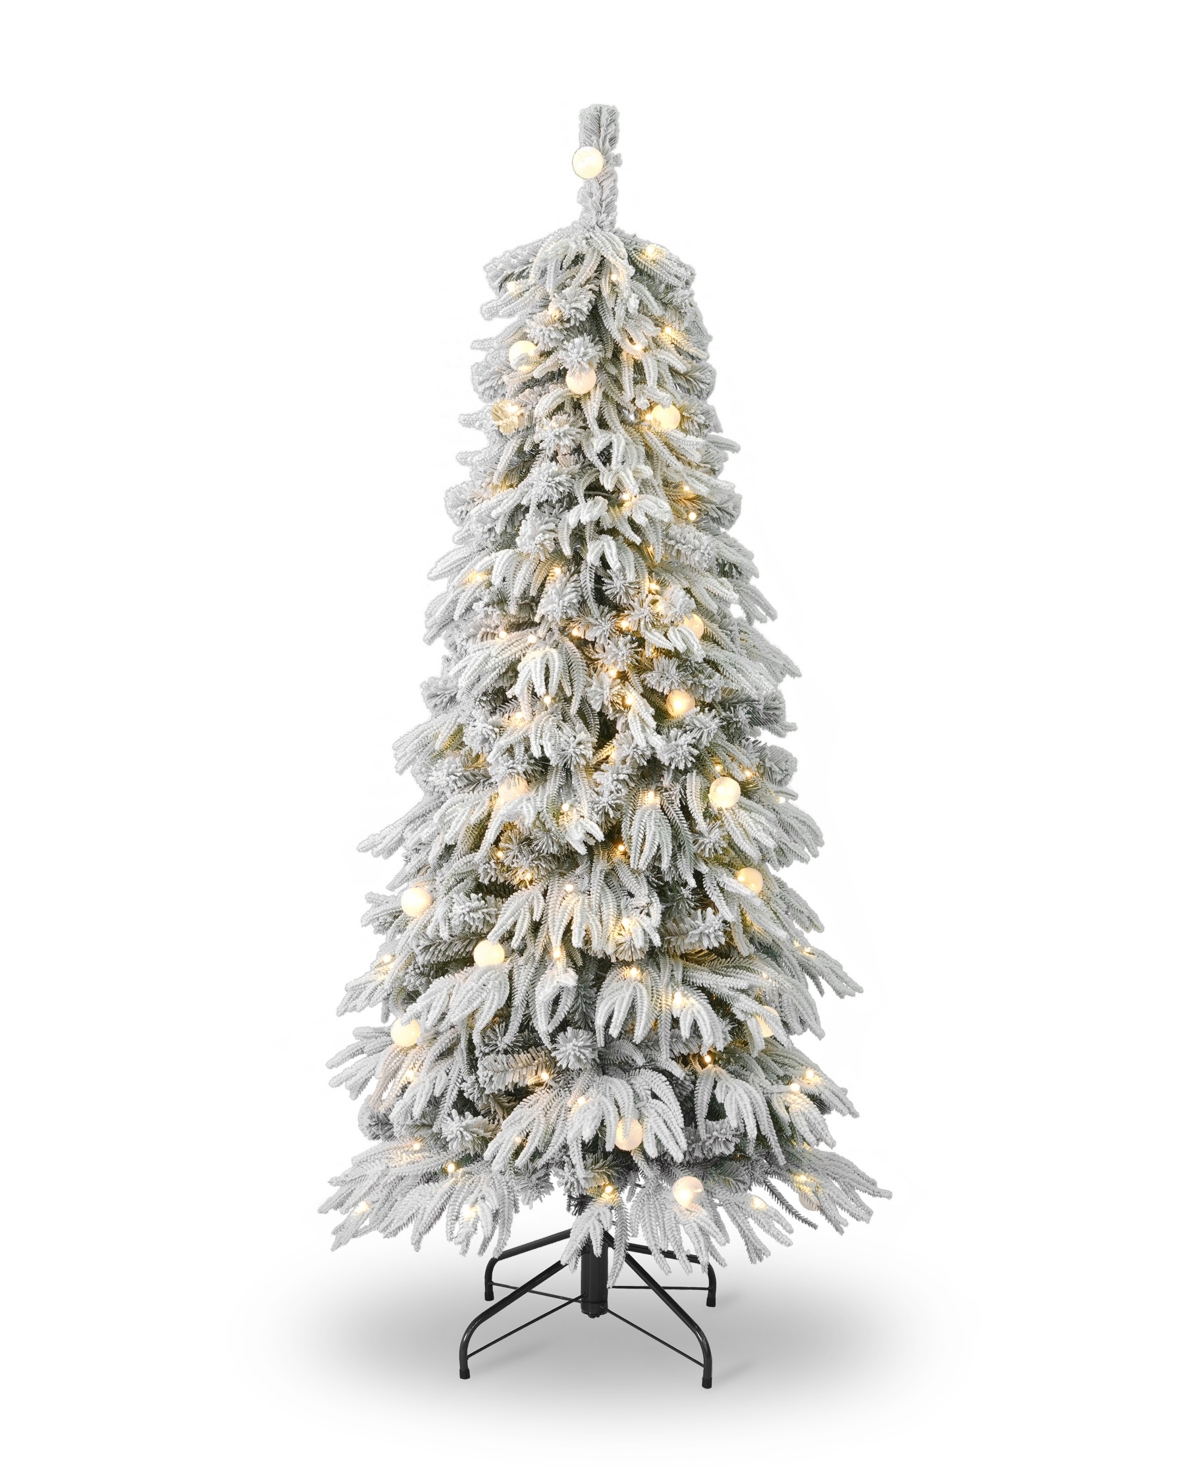 Frosted Acadia 6' Pre-Lit Flocked Pe Mixed Pvc Slim Tree with Metal Standing, 1865 Tips, 200 Changing Led Lights - White